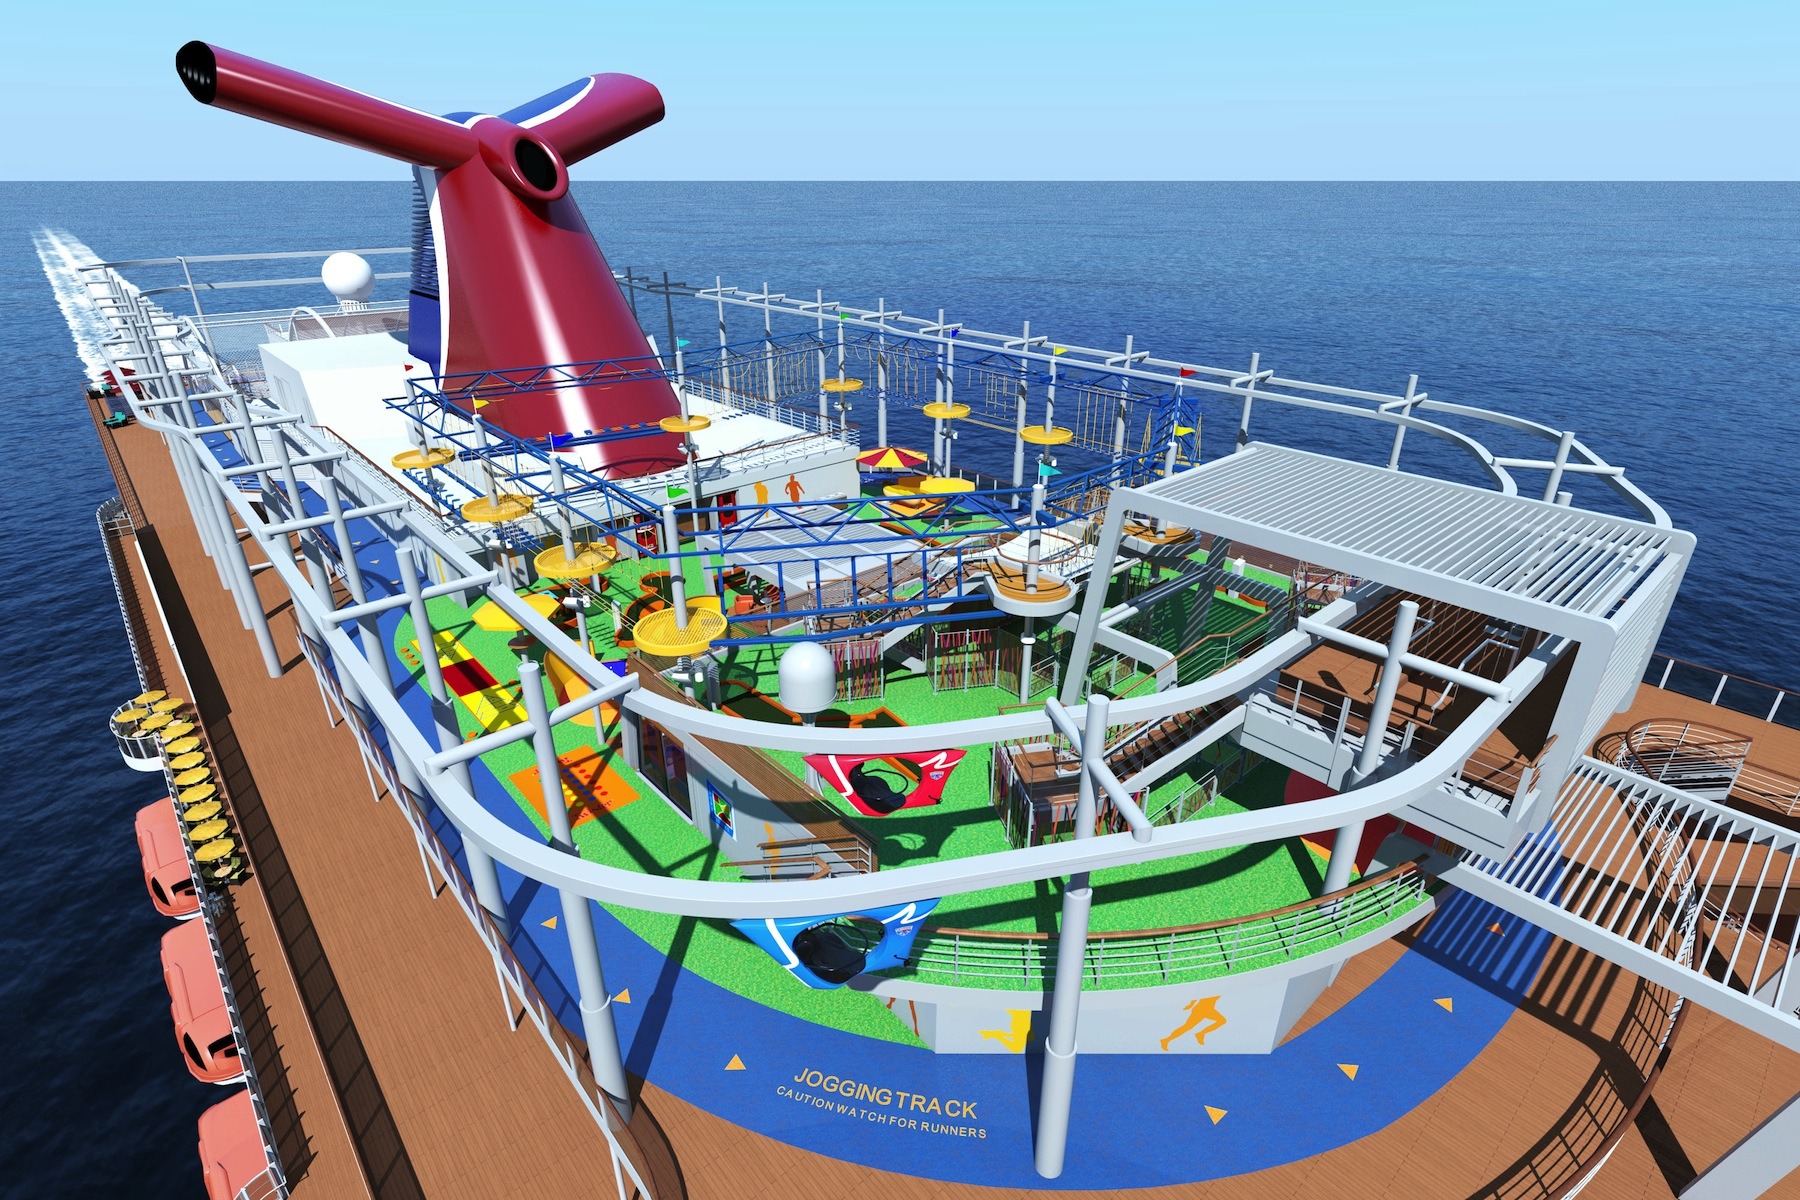 Carnival Vista to debut with firstofitskind family features